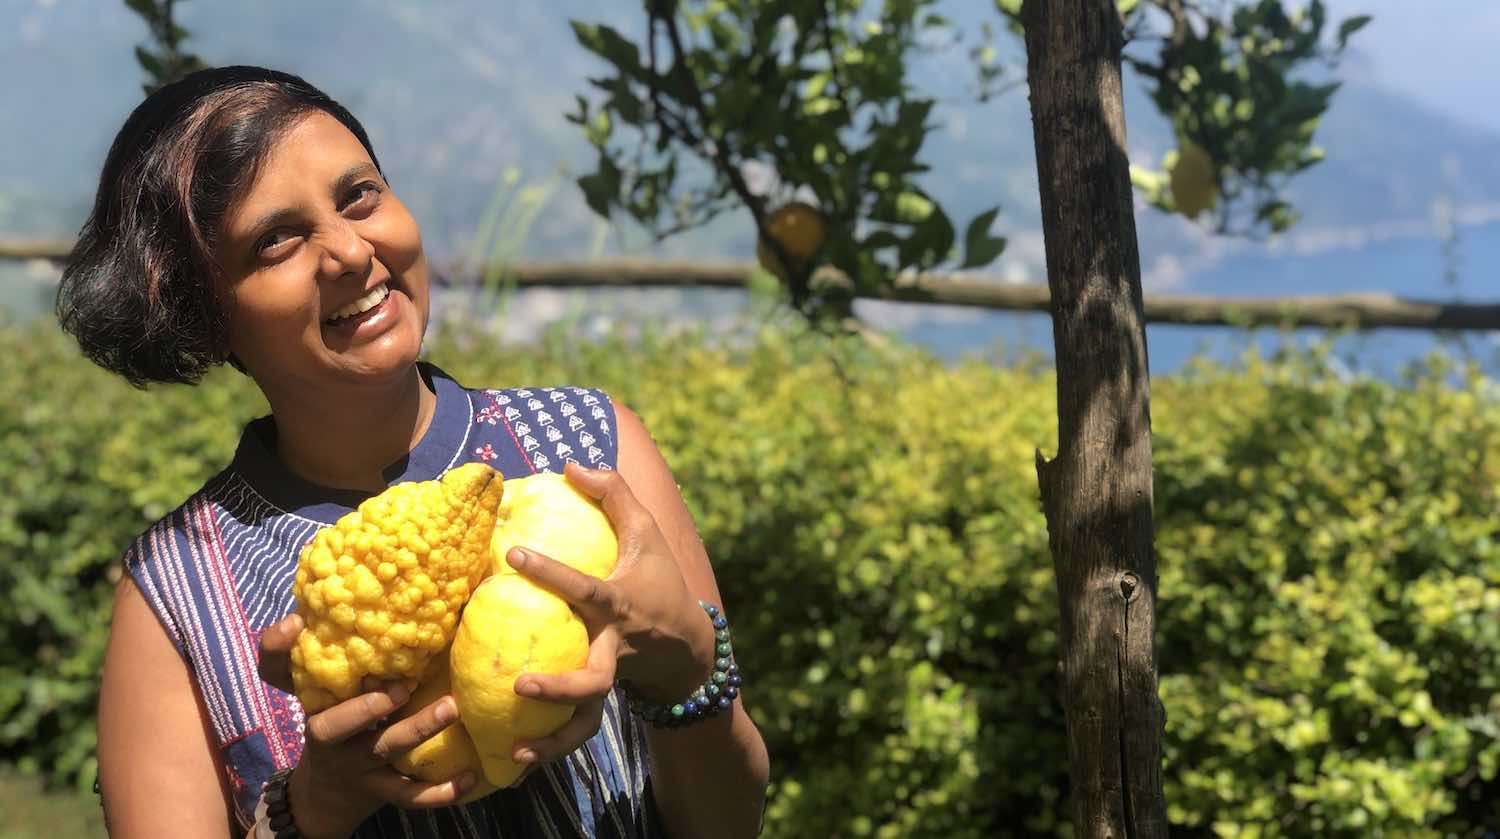 Short haired Indian girl holding large Italian lemons and smiling at the camera. Head tilted slightly. Blurred trees and plants in the background.